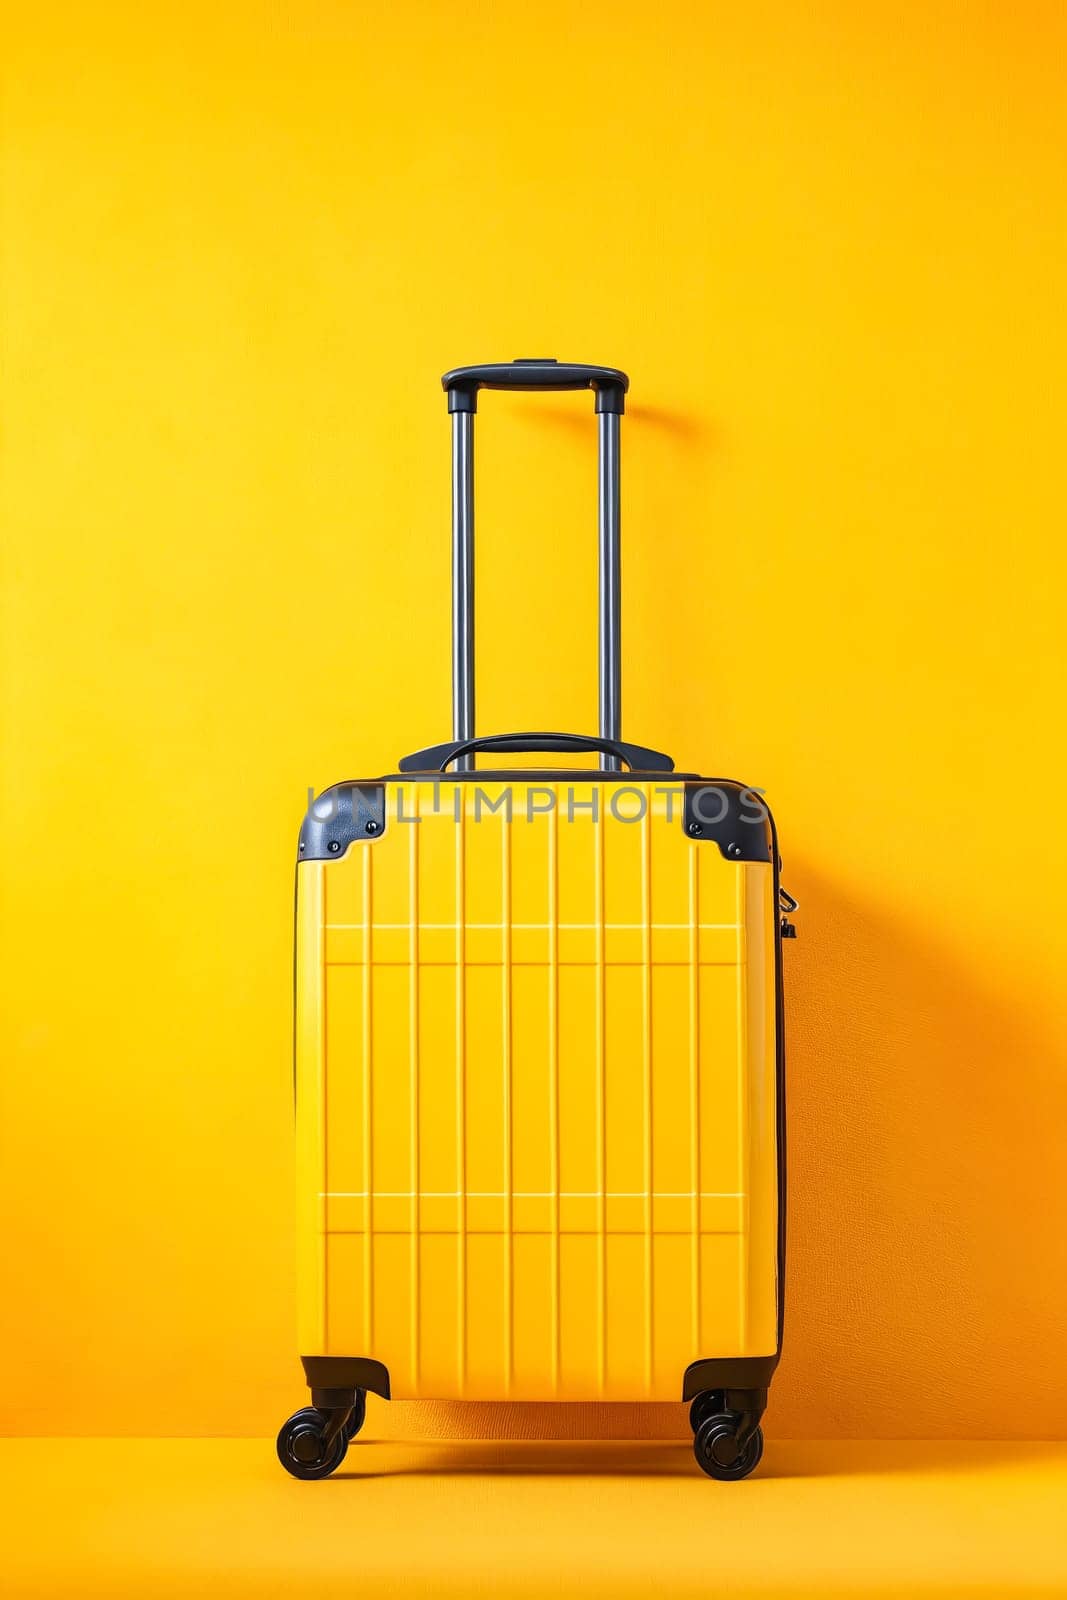 A yellow suitcase is sitting on a yellow background. The suitcase is open and the wheels are visible. Concept of travel and adventure, as the suitcase is ready to be packed and taken on a journey. Generative AI